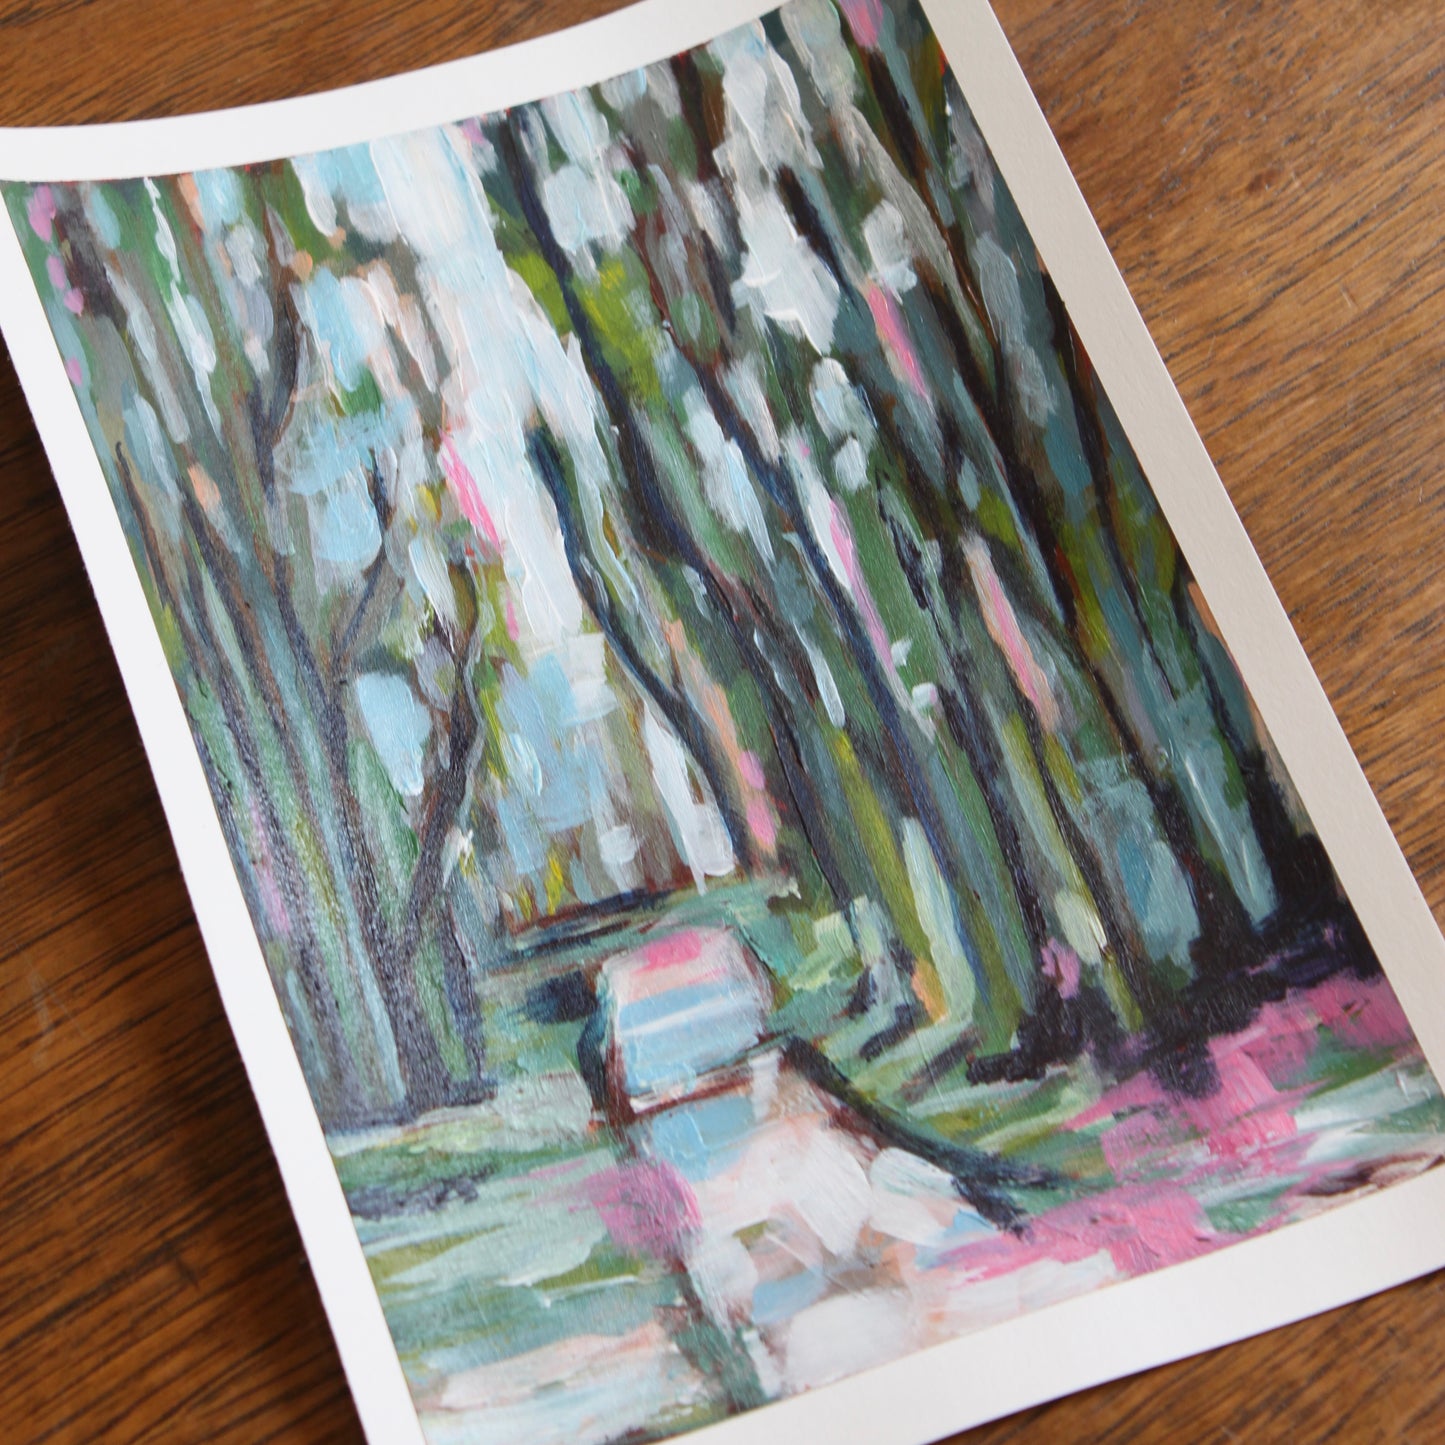 Through the Woods on paper